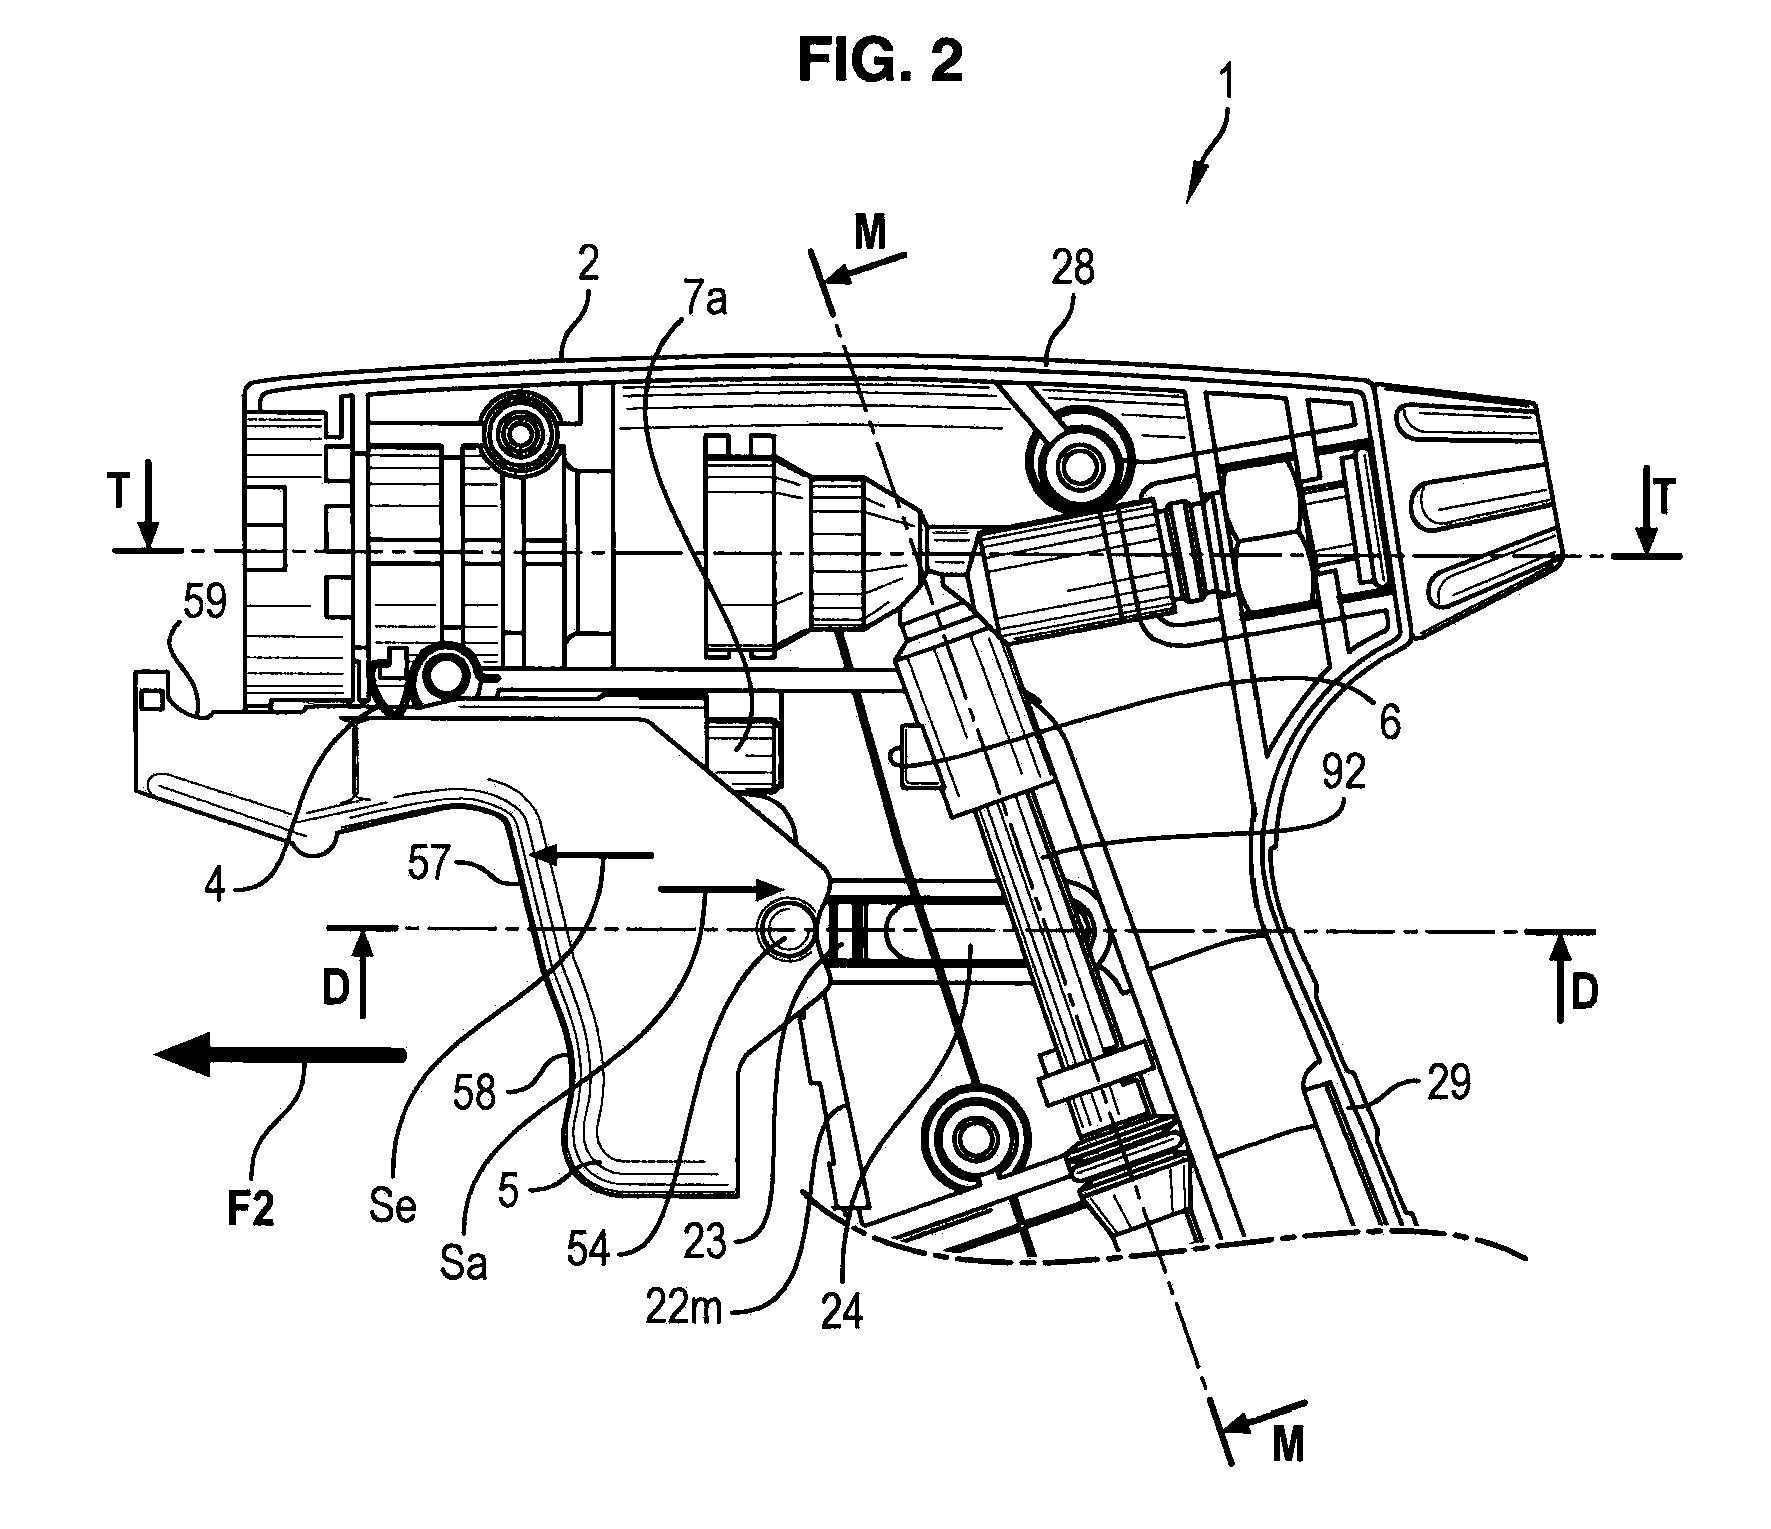 Hand tool with incorporated burner and a trigger-piezoelectric igniter unit which may be disassembled